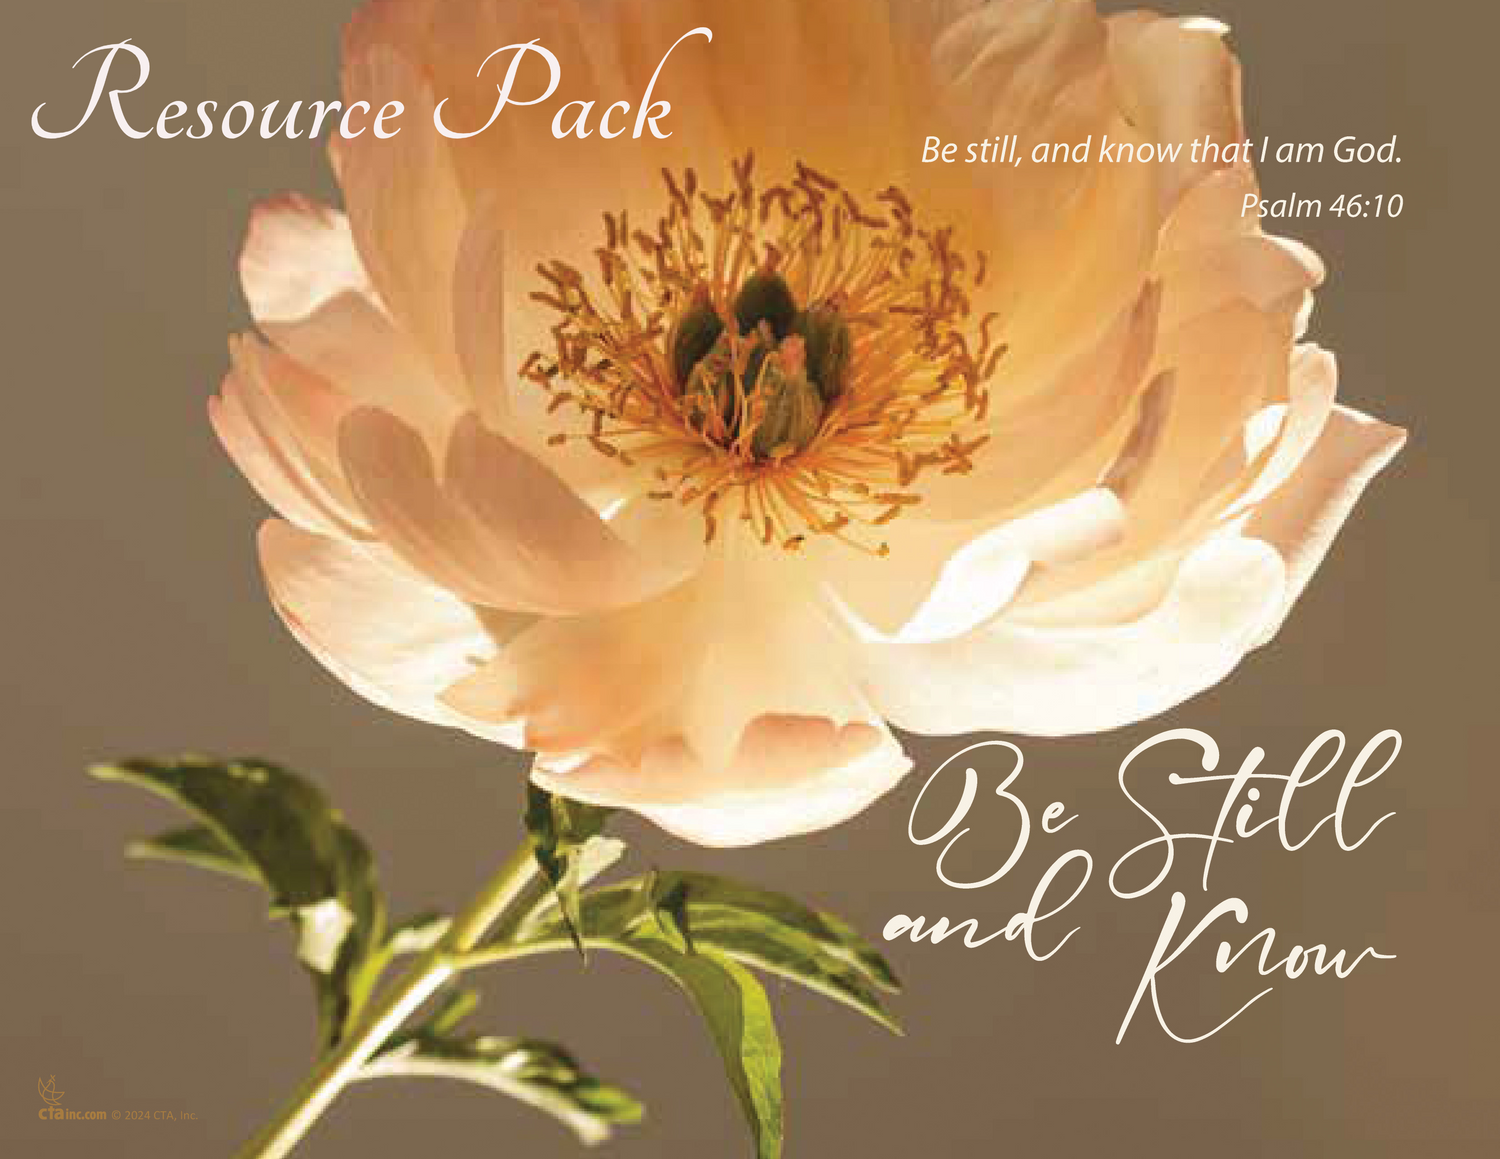 Be Still and Know downloadable resource pack for Christian women's ministry